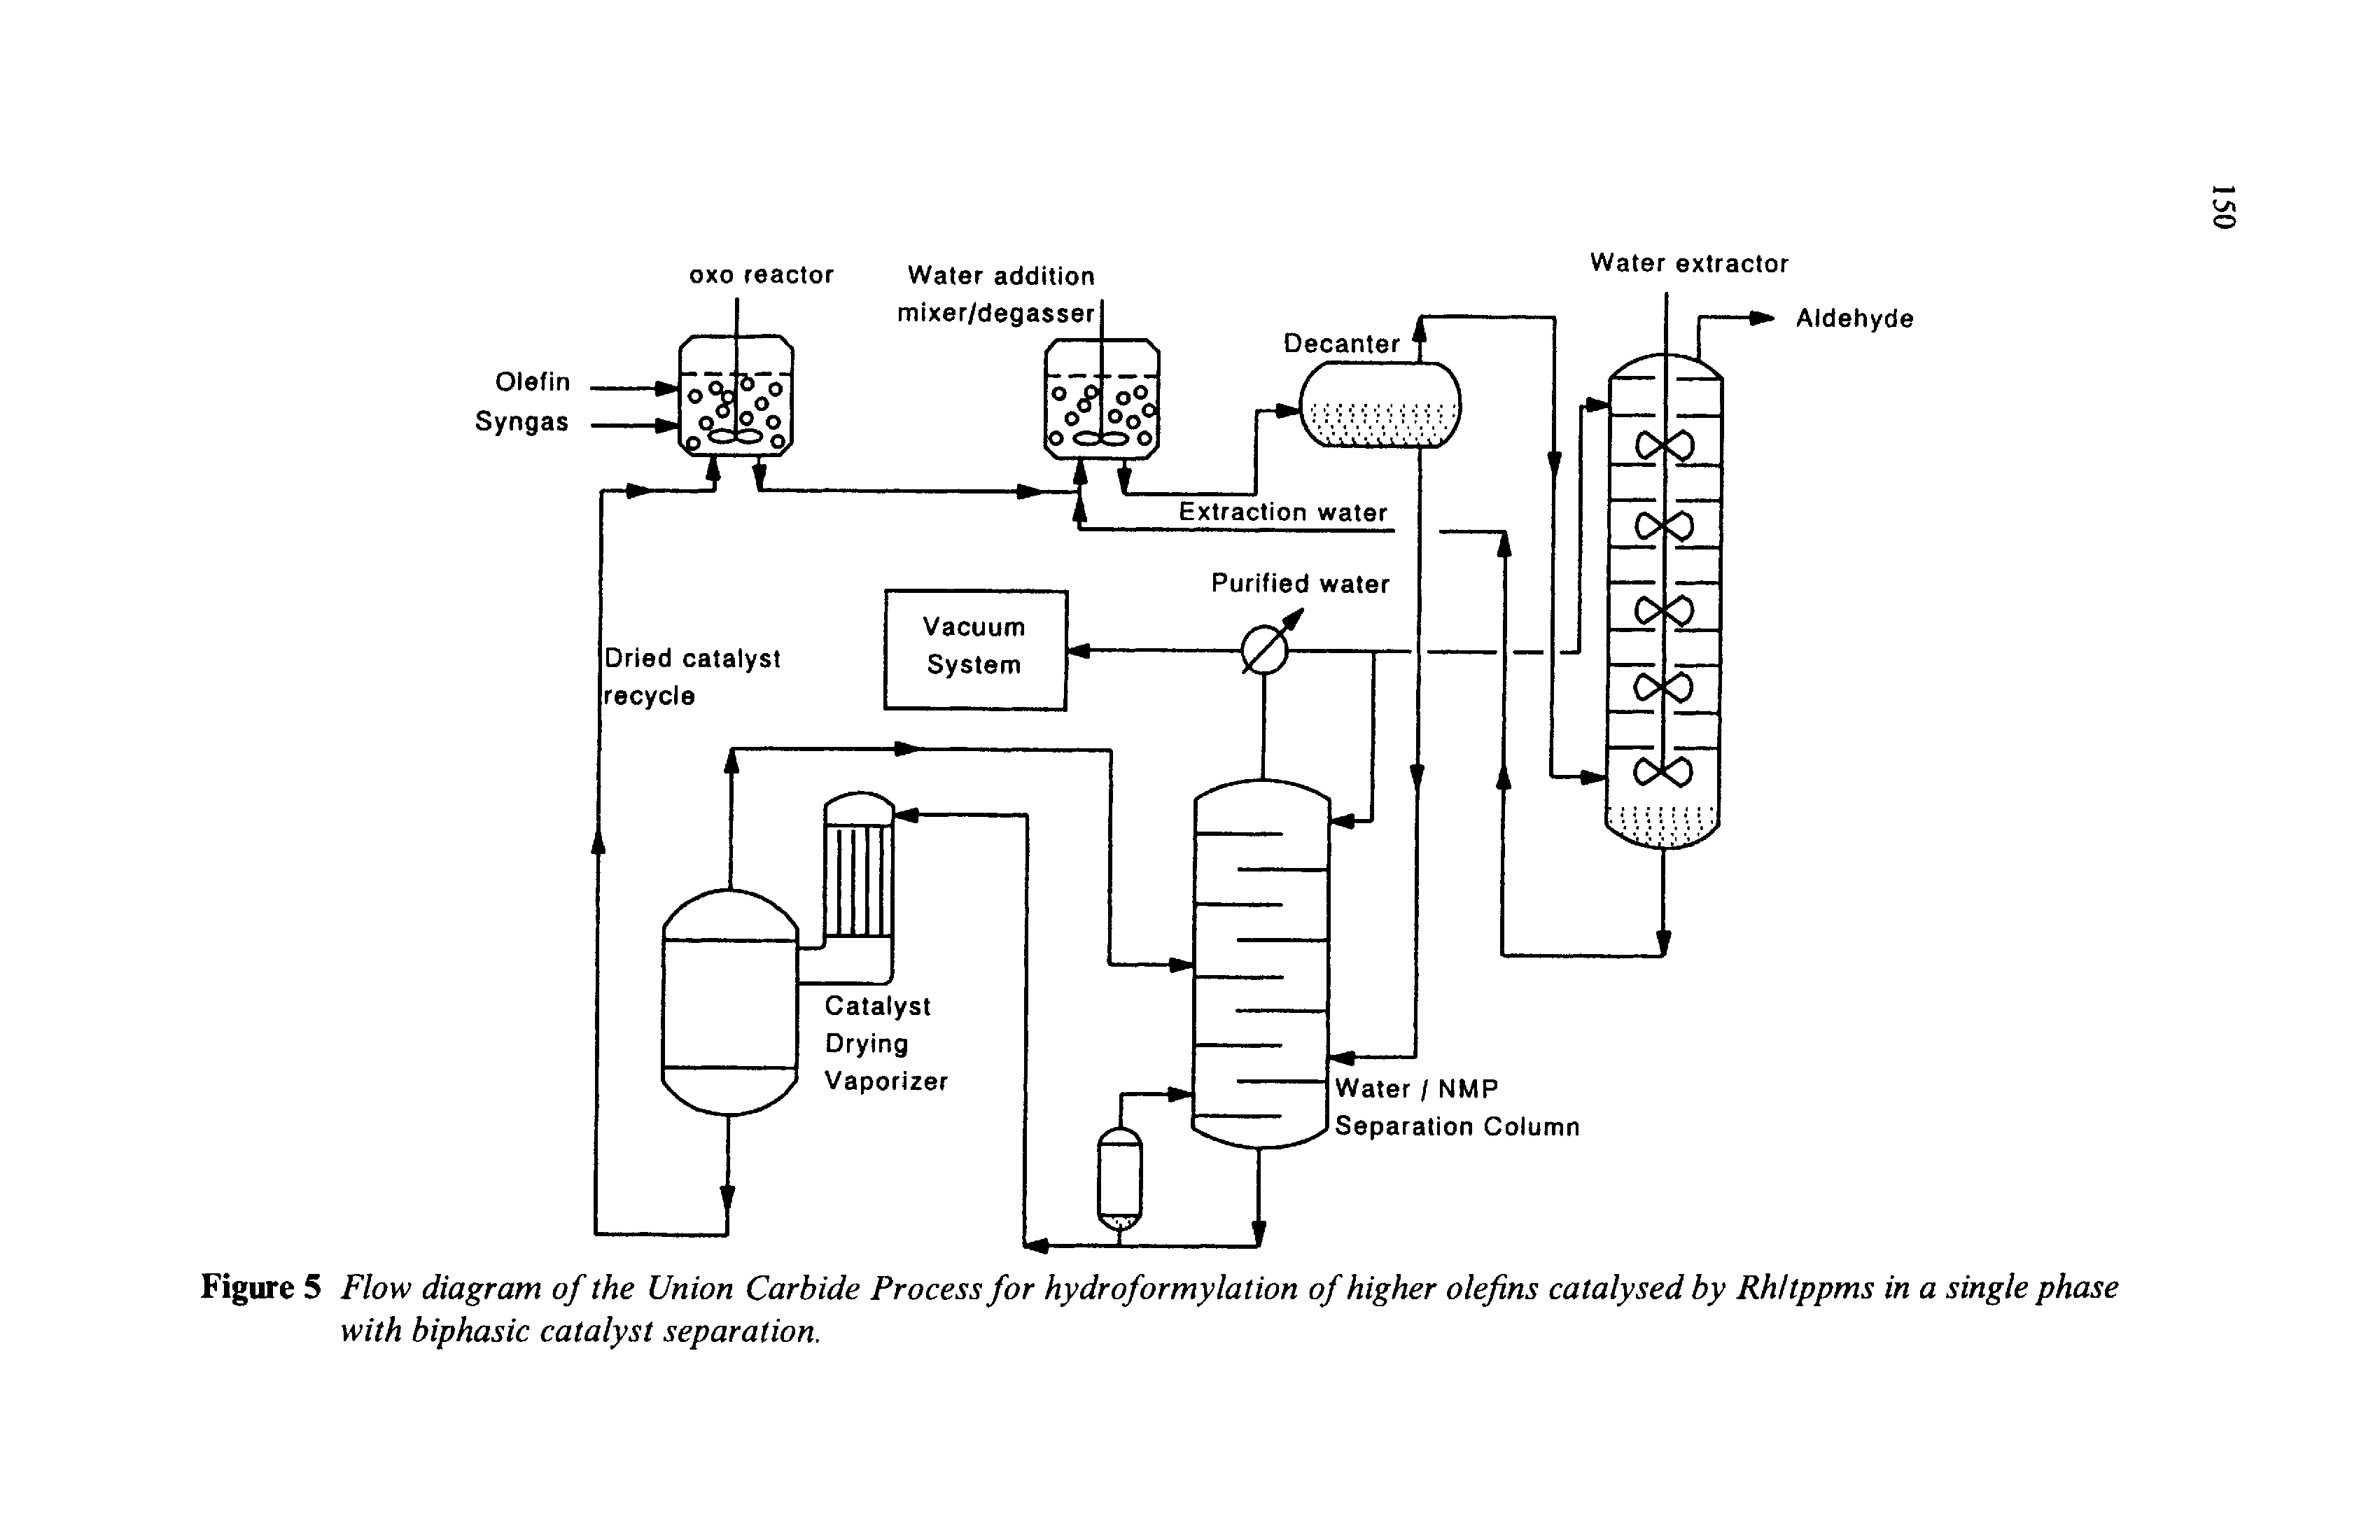 Figure 5 Flow diagram of the Union Carbide Process for hydroformylation of higher olefins catalysed by Rhltppms in a single phase with biphasic catalyst separation.